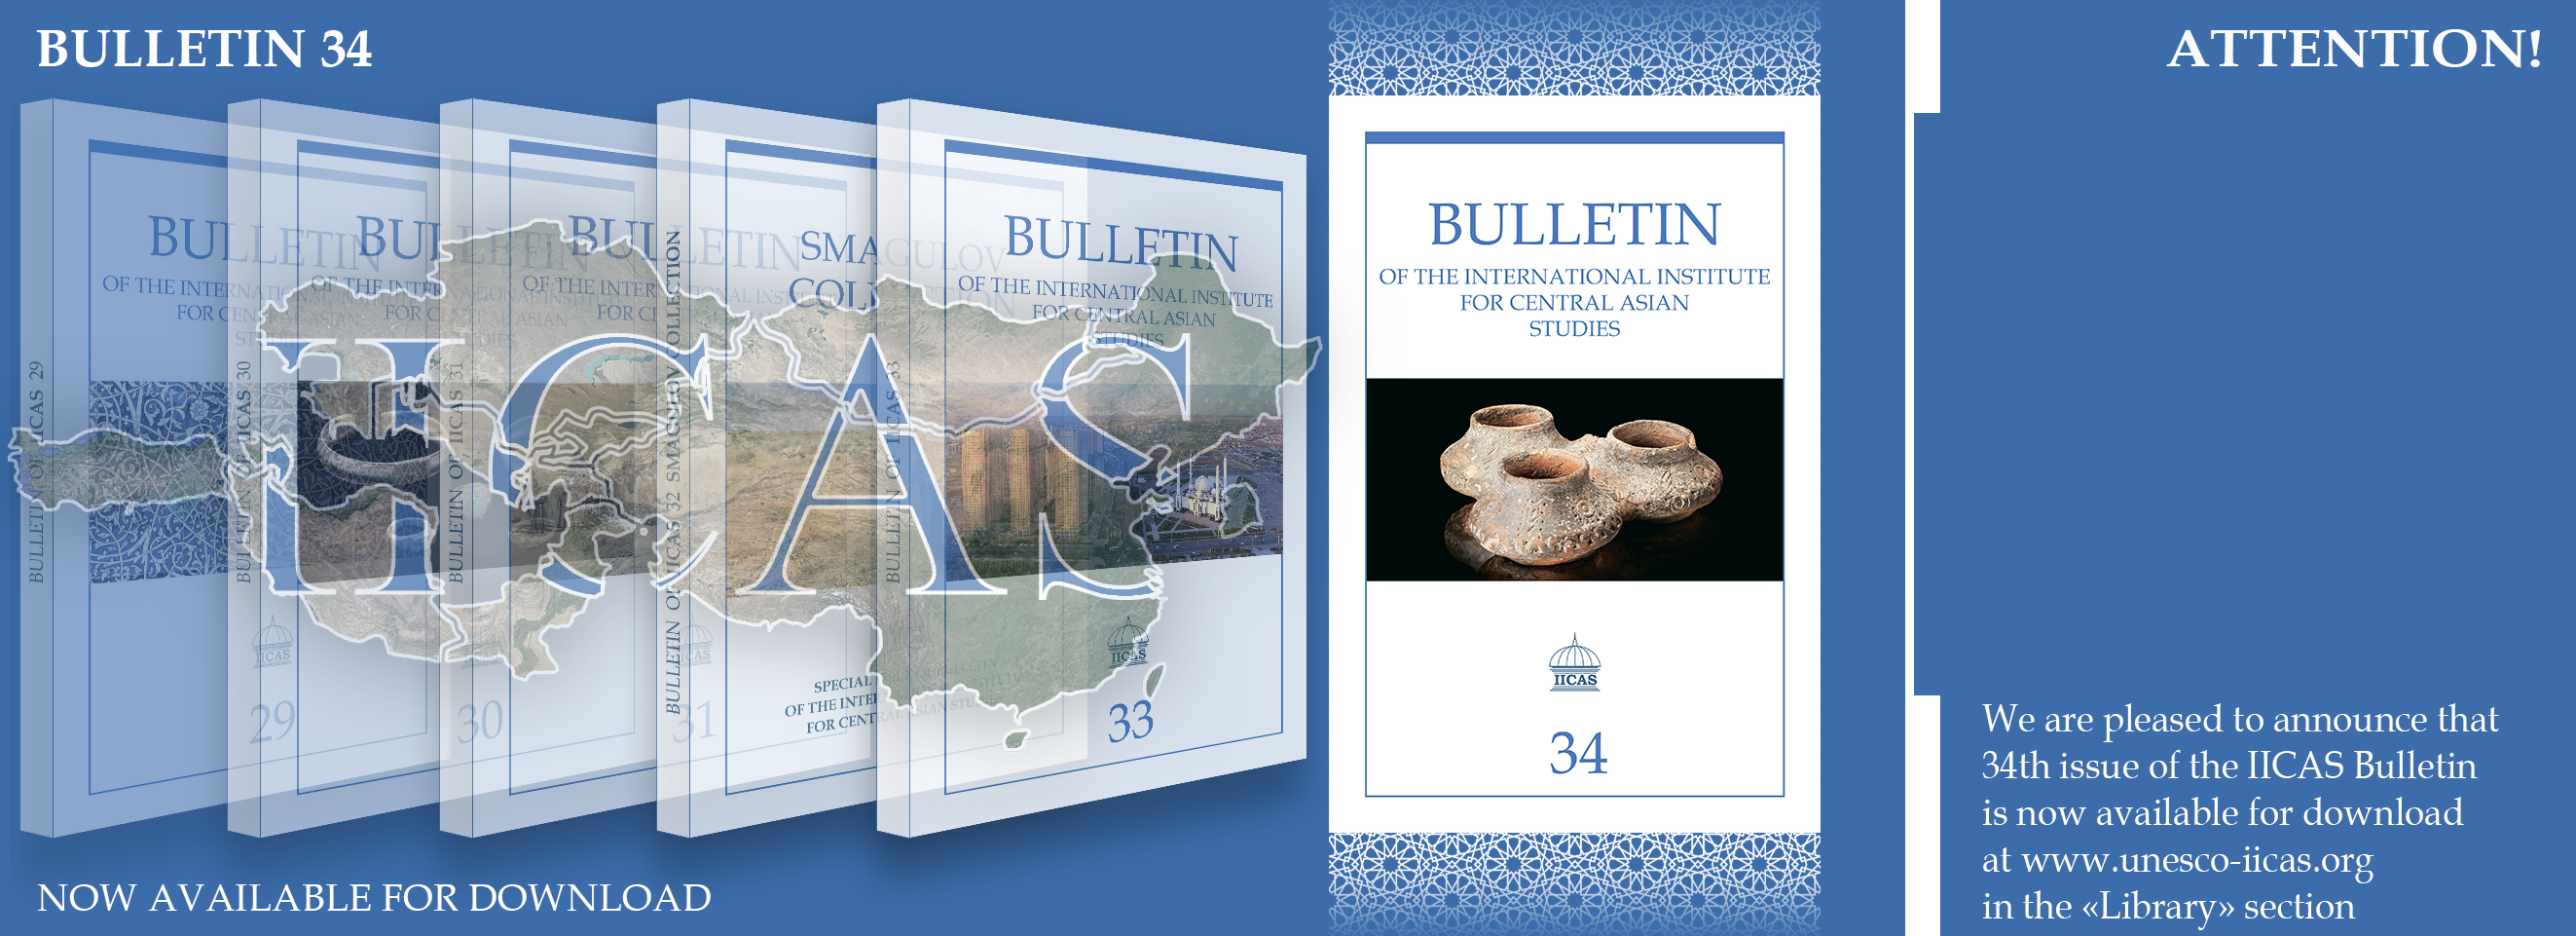 The International Institute for Central Asian Studies announces the release of the 34th issue of the Bulletin of IICAS